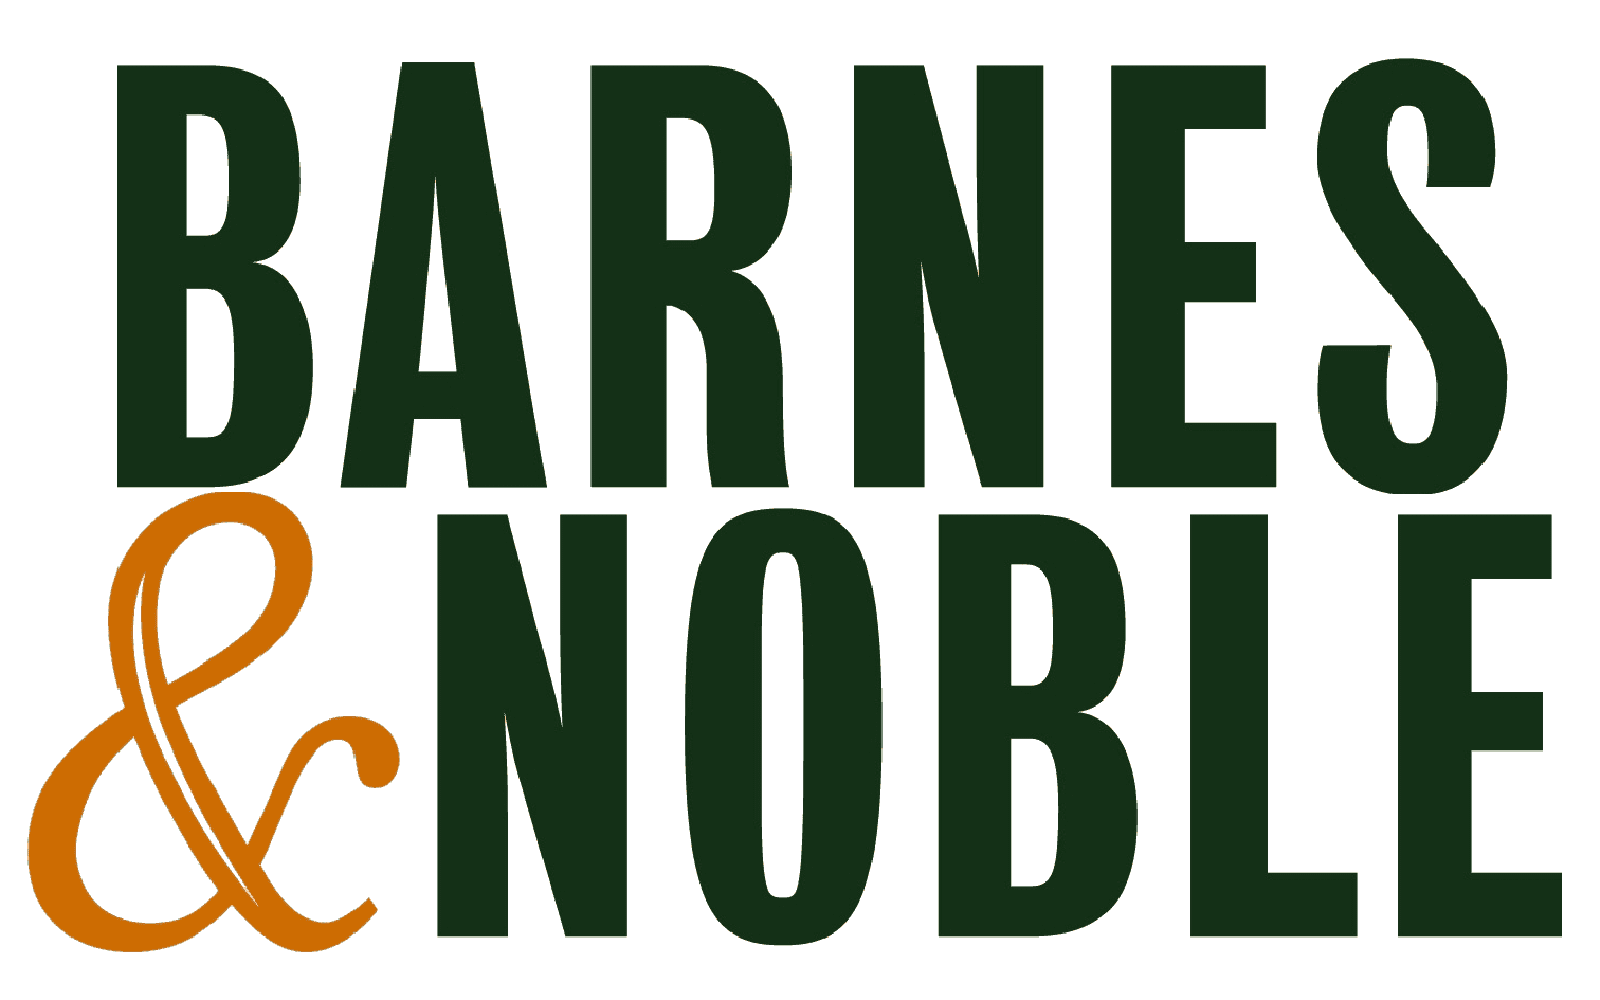 Writers of the West connected to Barnes & Noble and ready to help you A-Z to make sure your book stands out and shines at Barnes and Noble book shelves.